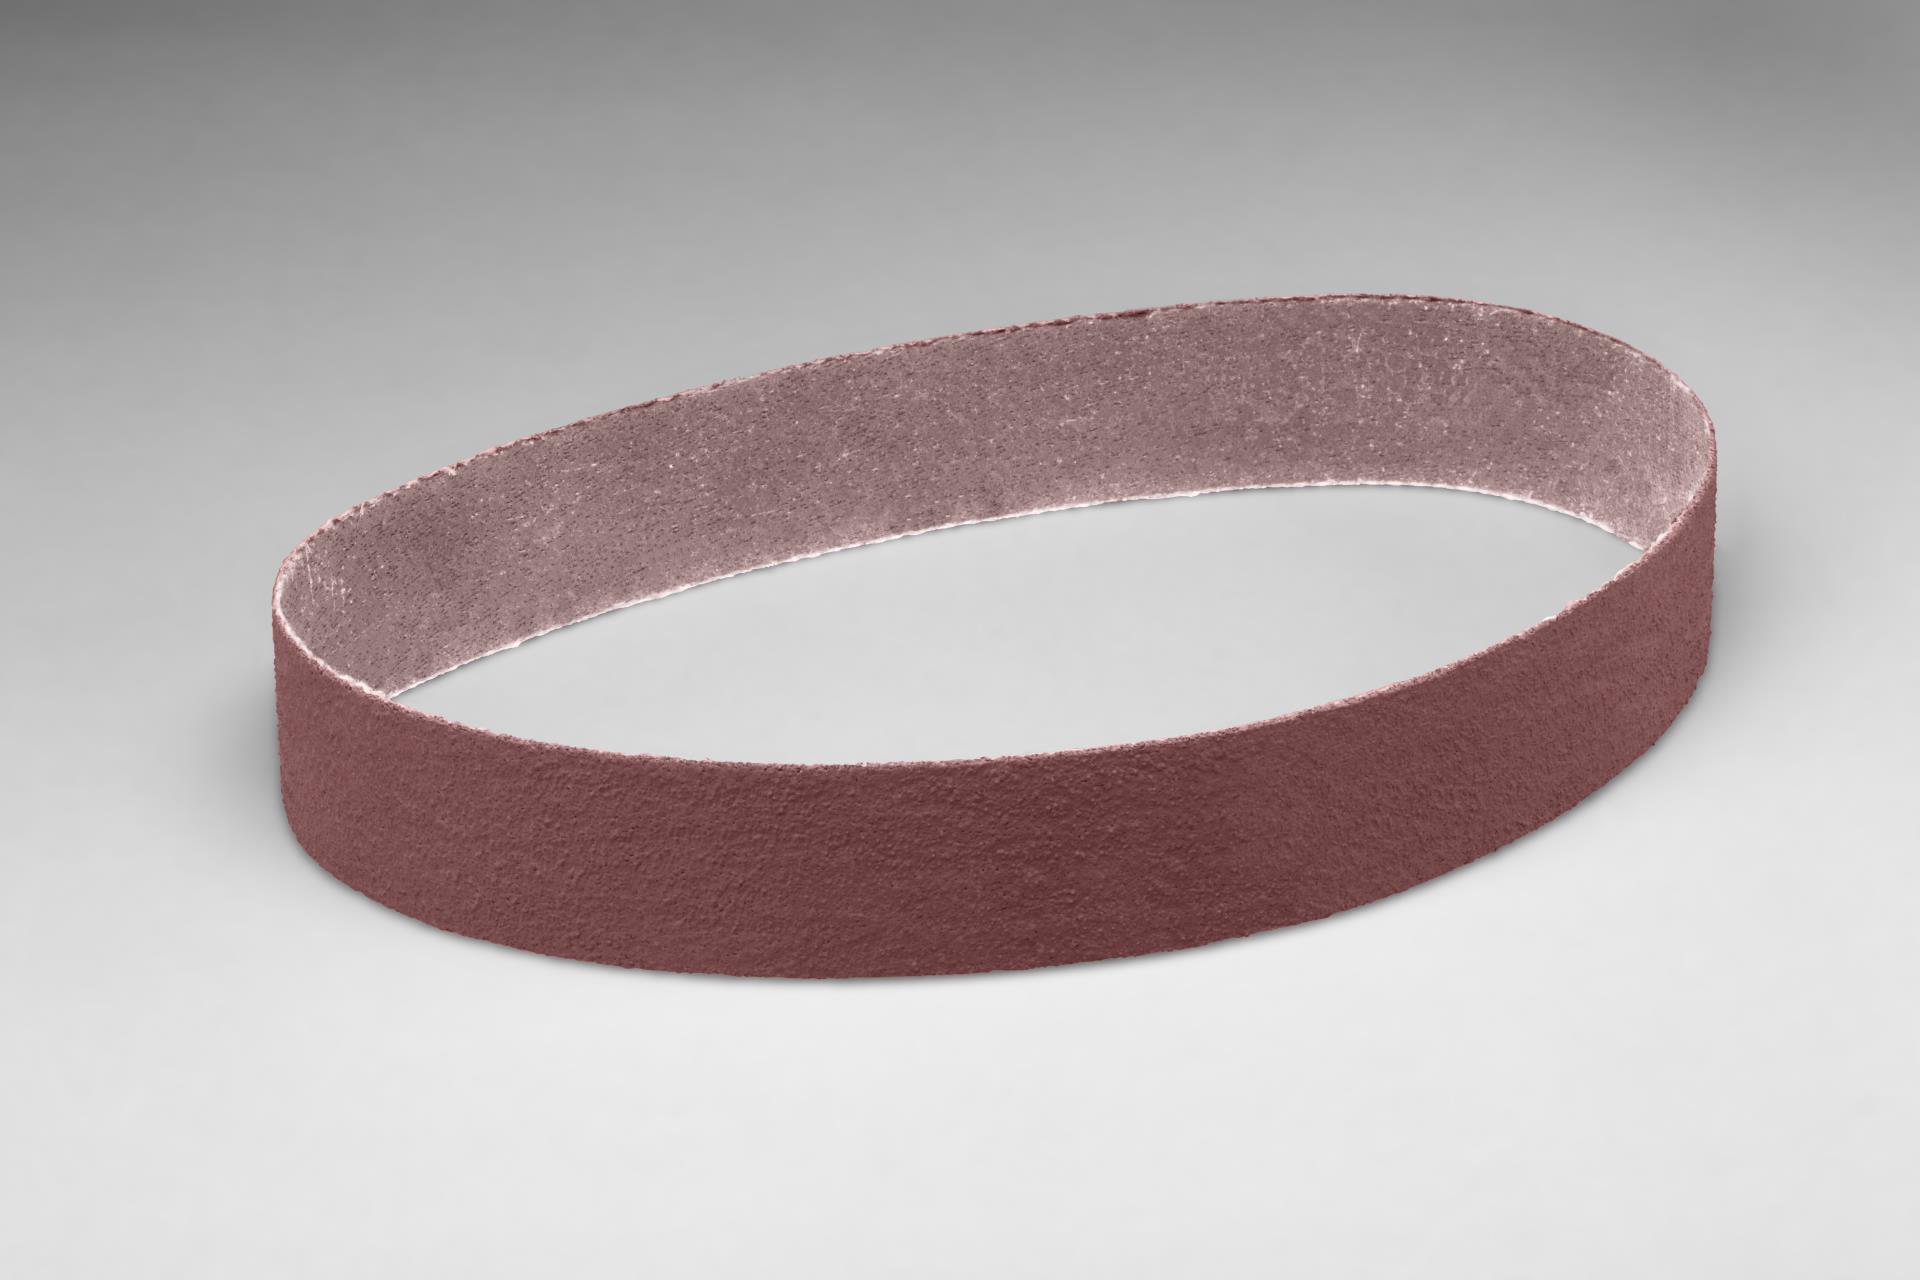 Standard Abrasives Surface Conditioning RC Belt 888009 1 in x 42 in VFN 10 per case 3M 